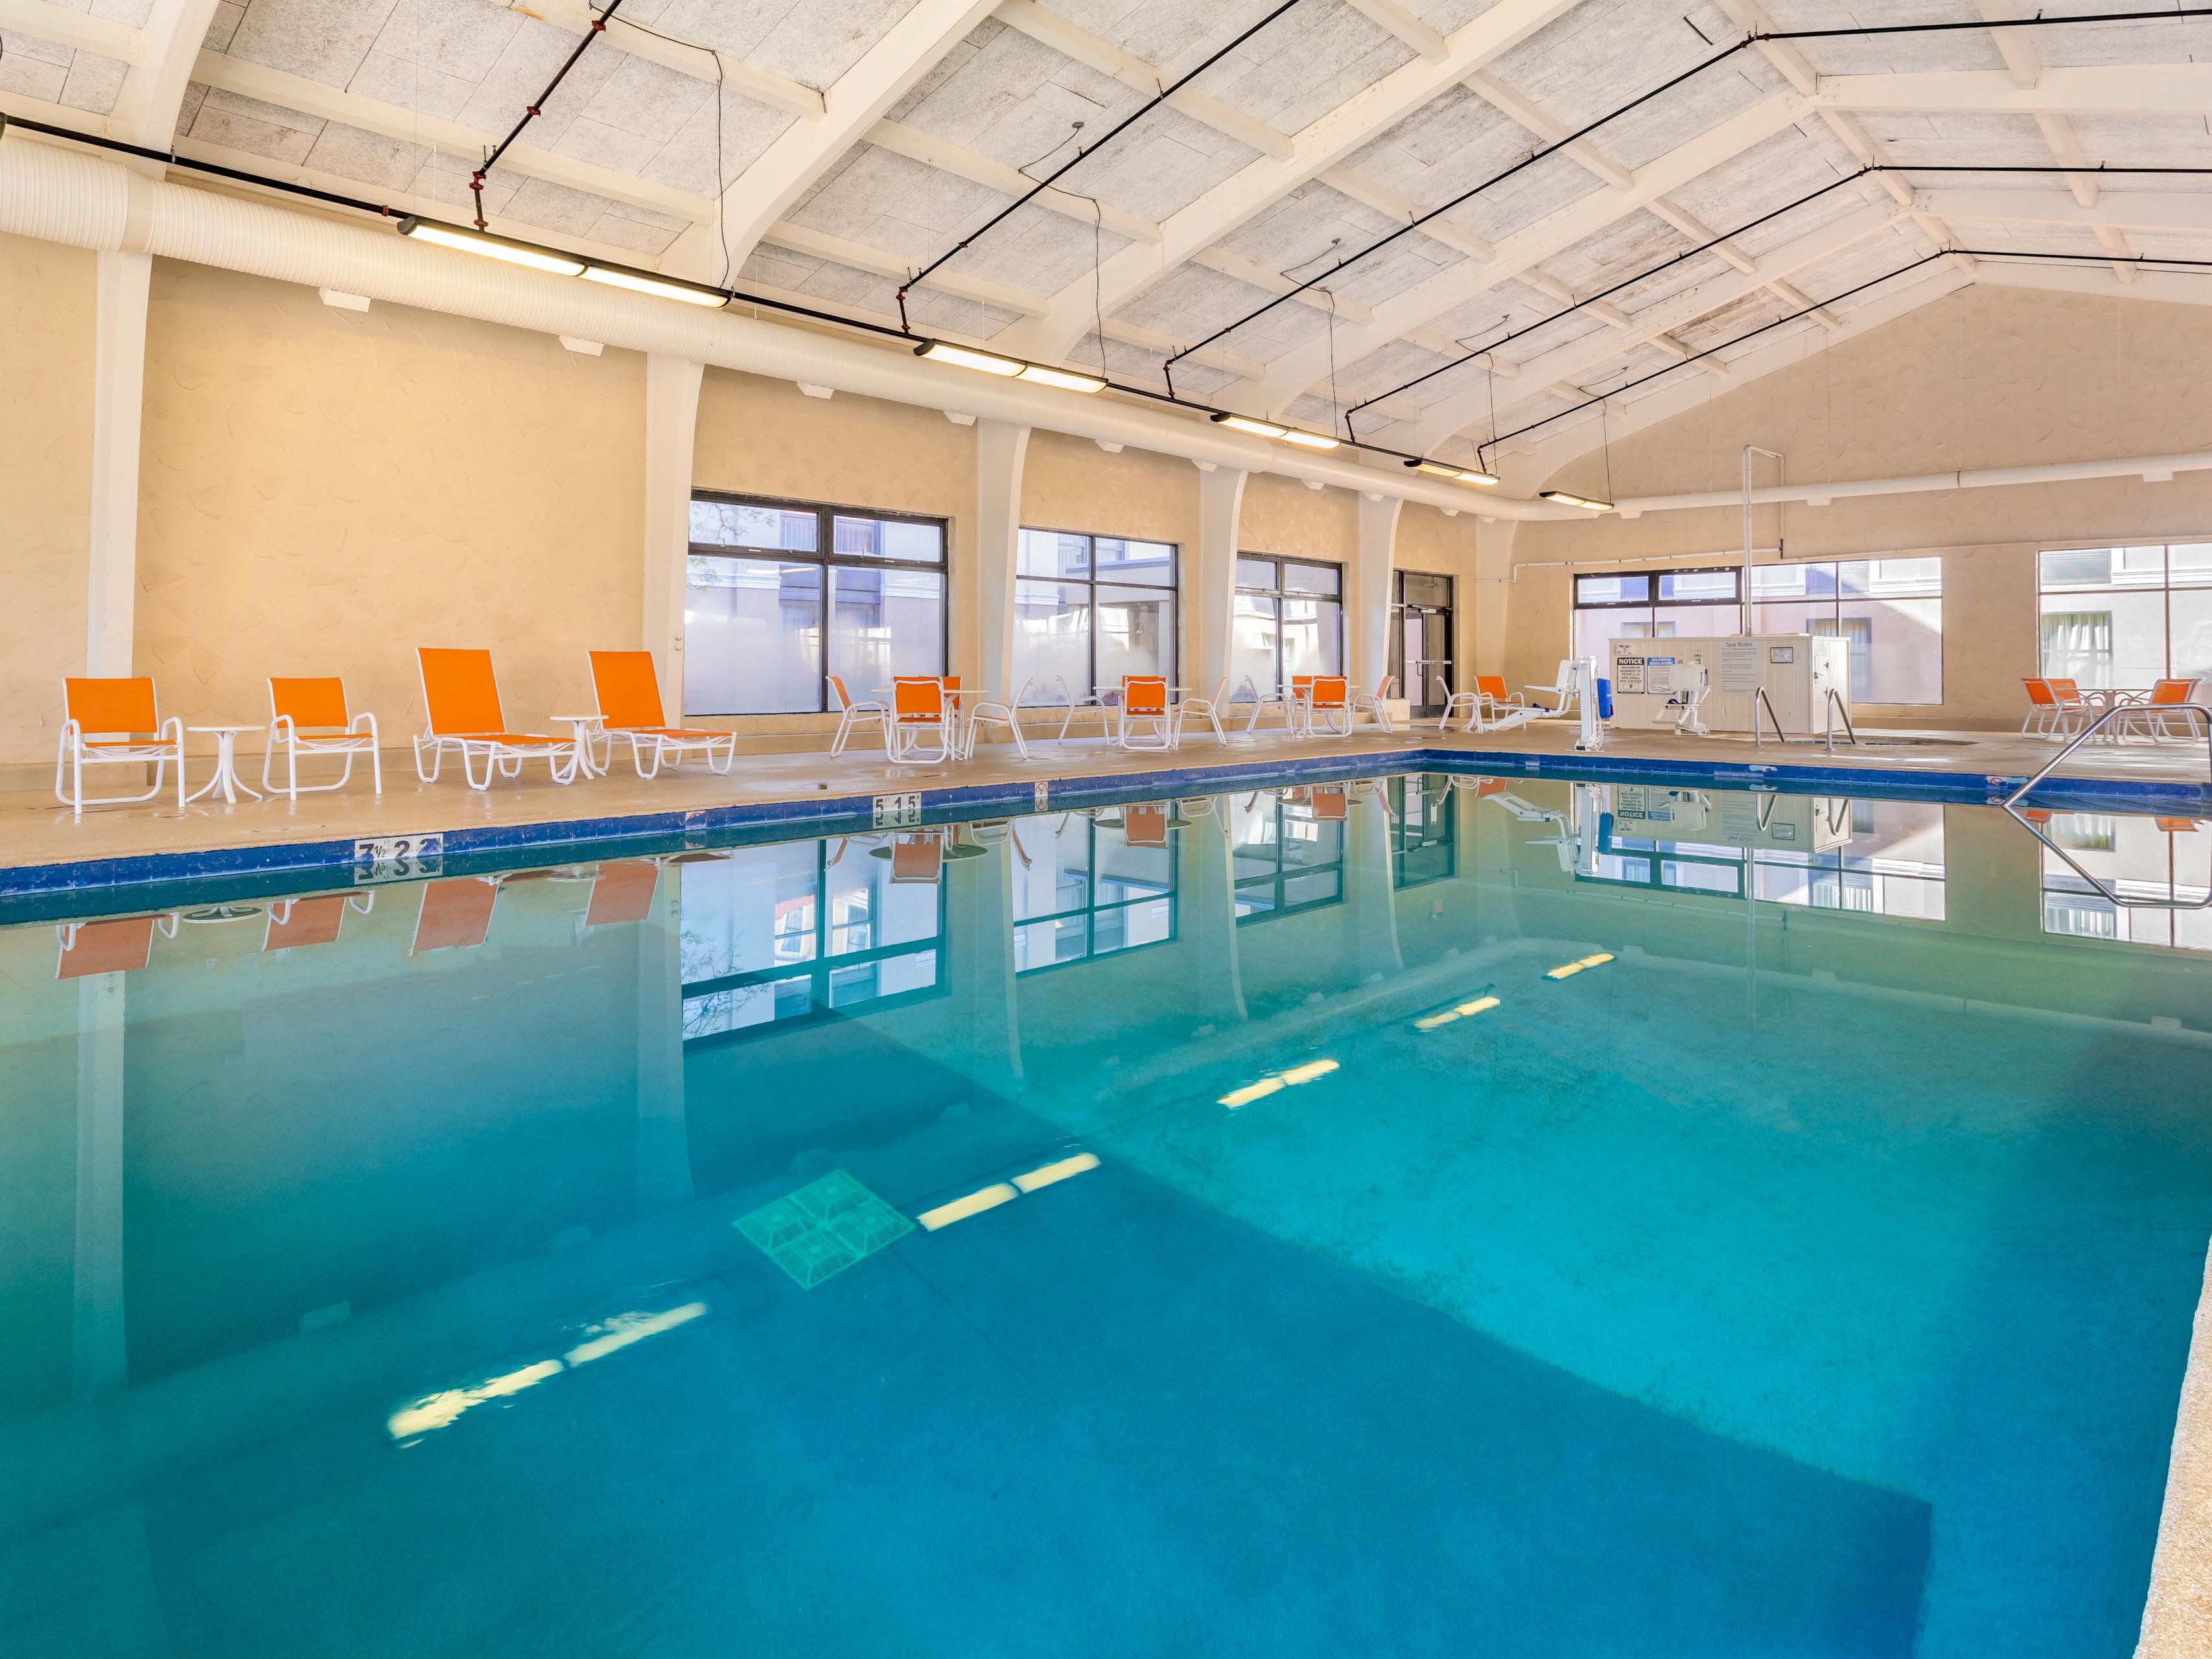 Come enjoy our heated indoor pool and whirlpool. Our pool is the largest indoor pool in Lake County, IL. We look forward to hosting you and your family while visiting Gurnee. 